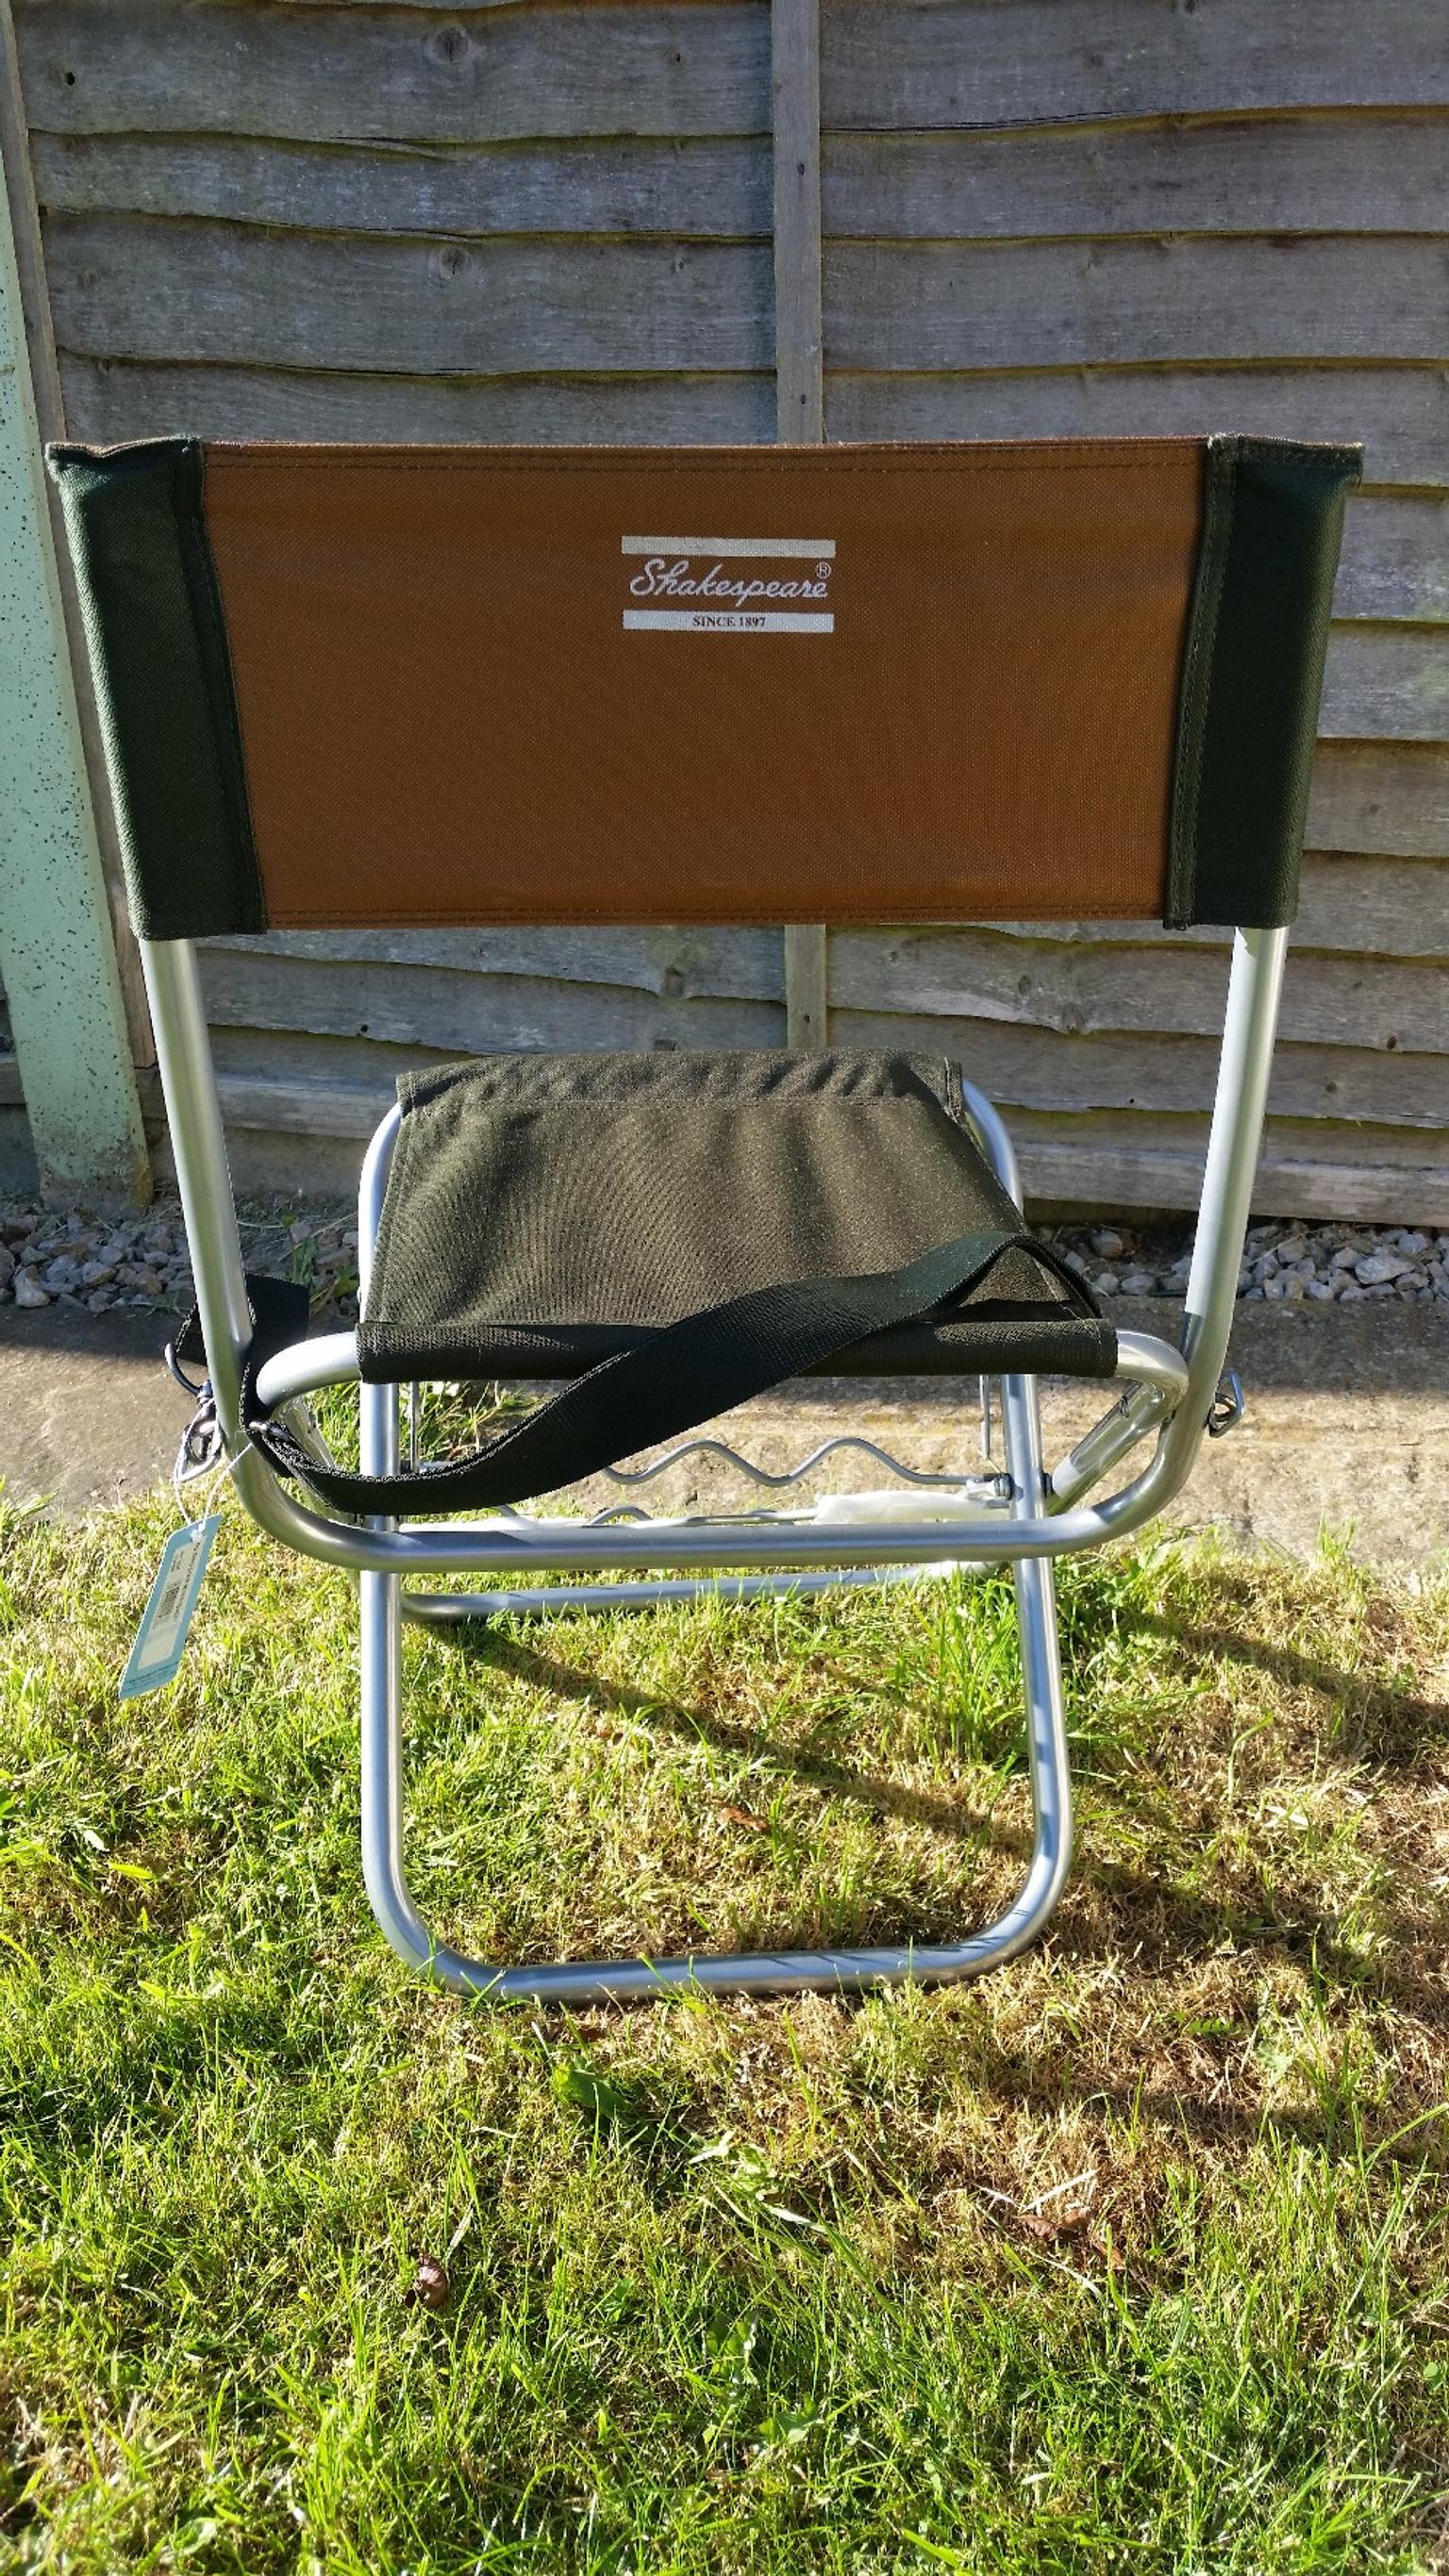 Shakespeare Folding Chair With Rod Rest In Cv21 Rugby For 20 00